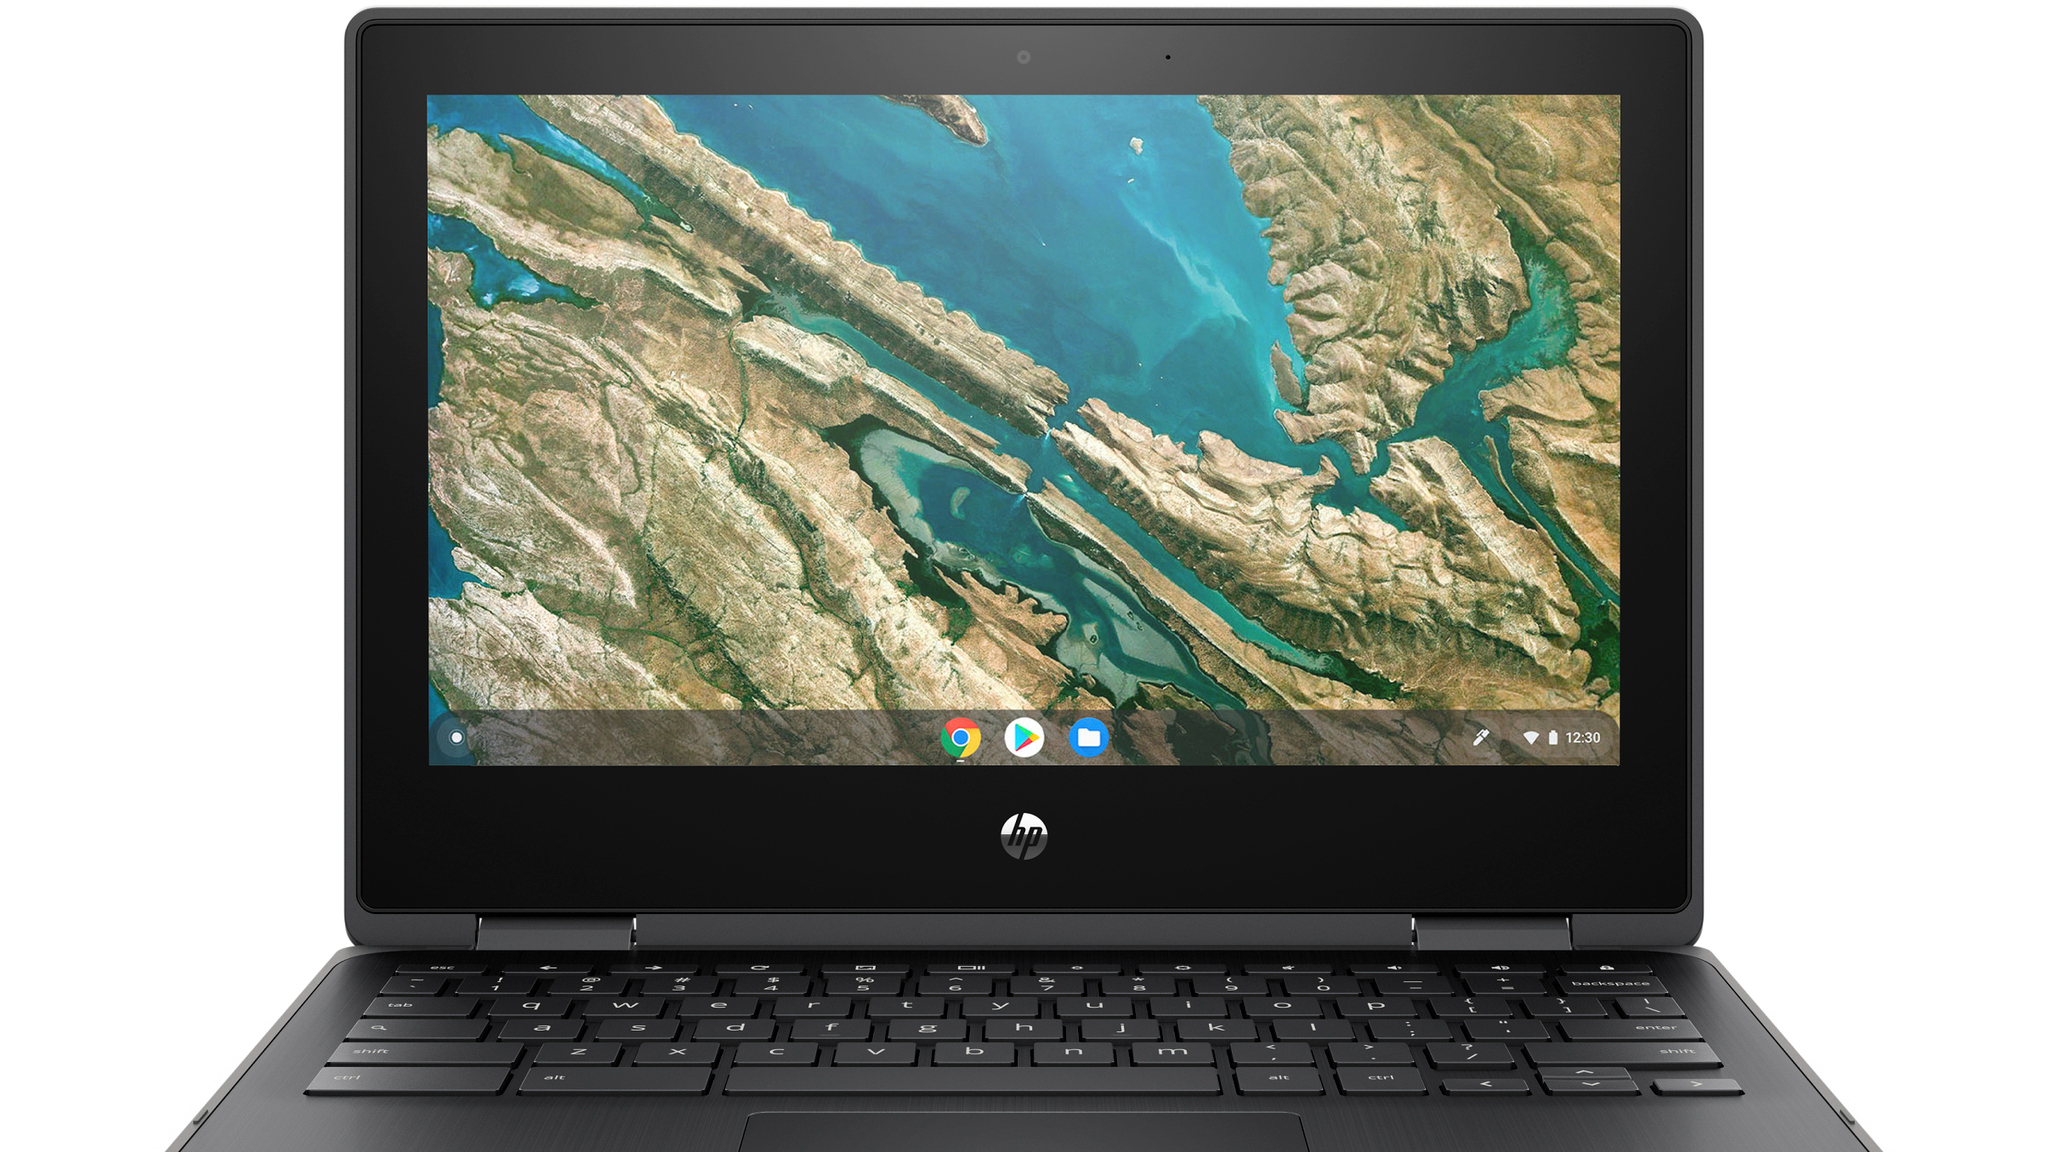 HP Fortis Chromebook gets affordable classroom updates